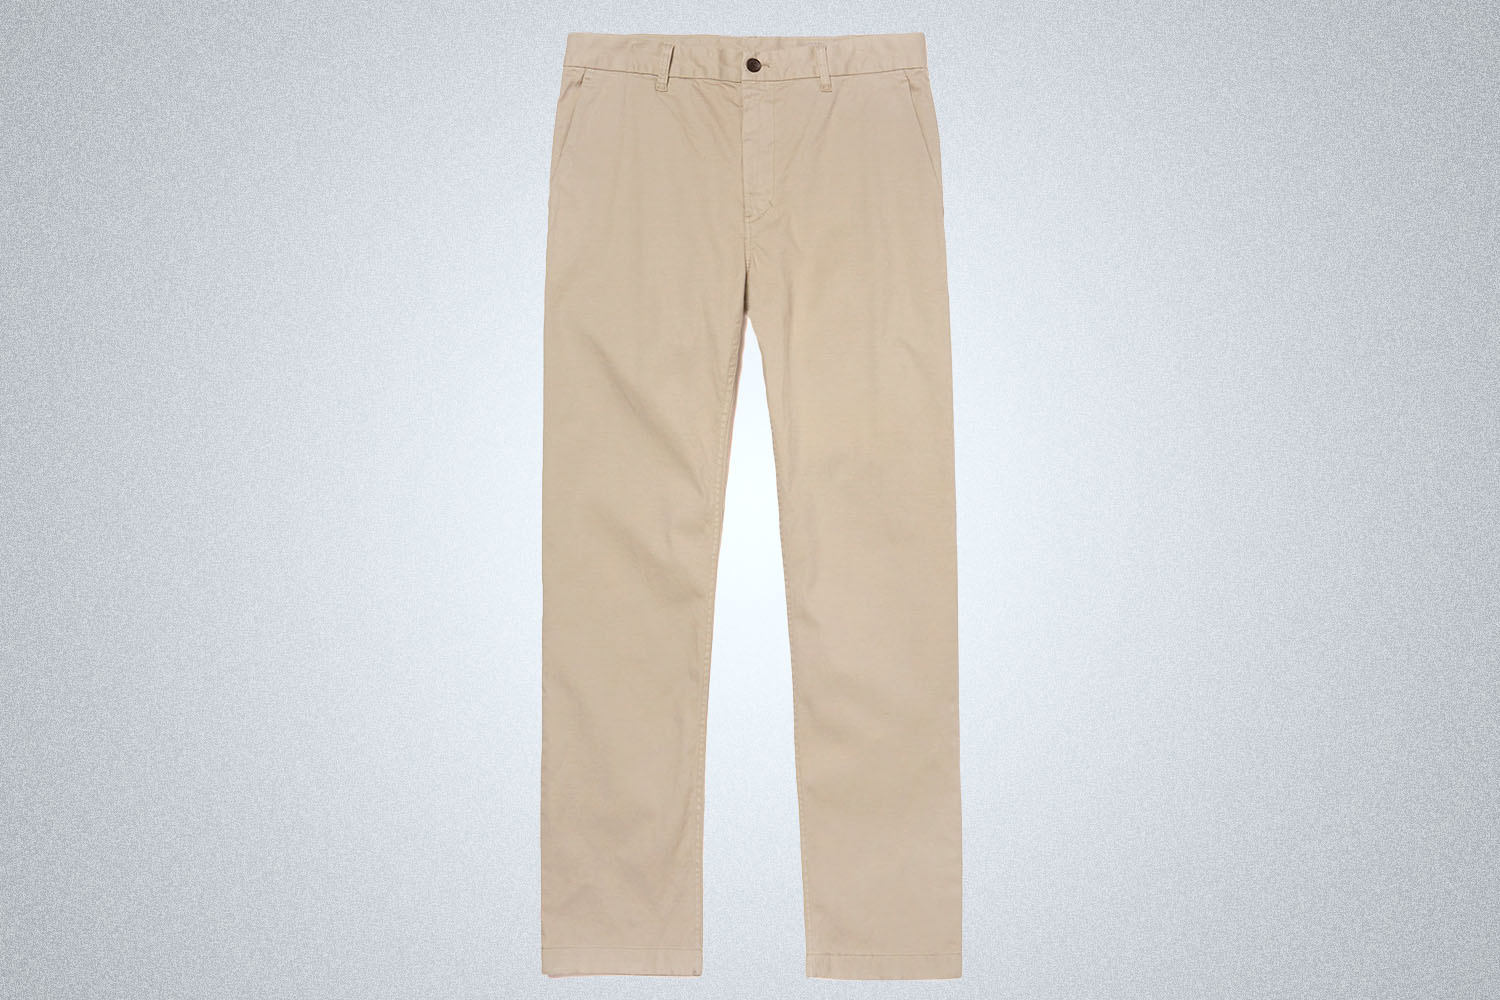 a pair of beige chinos